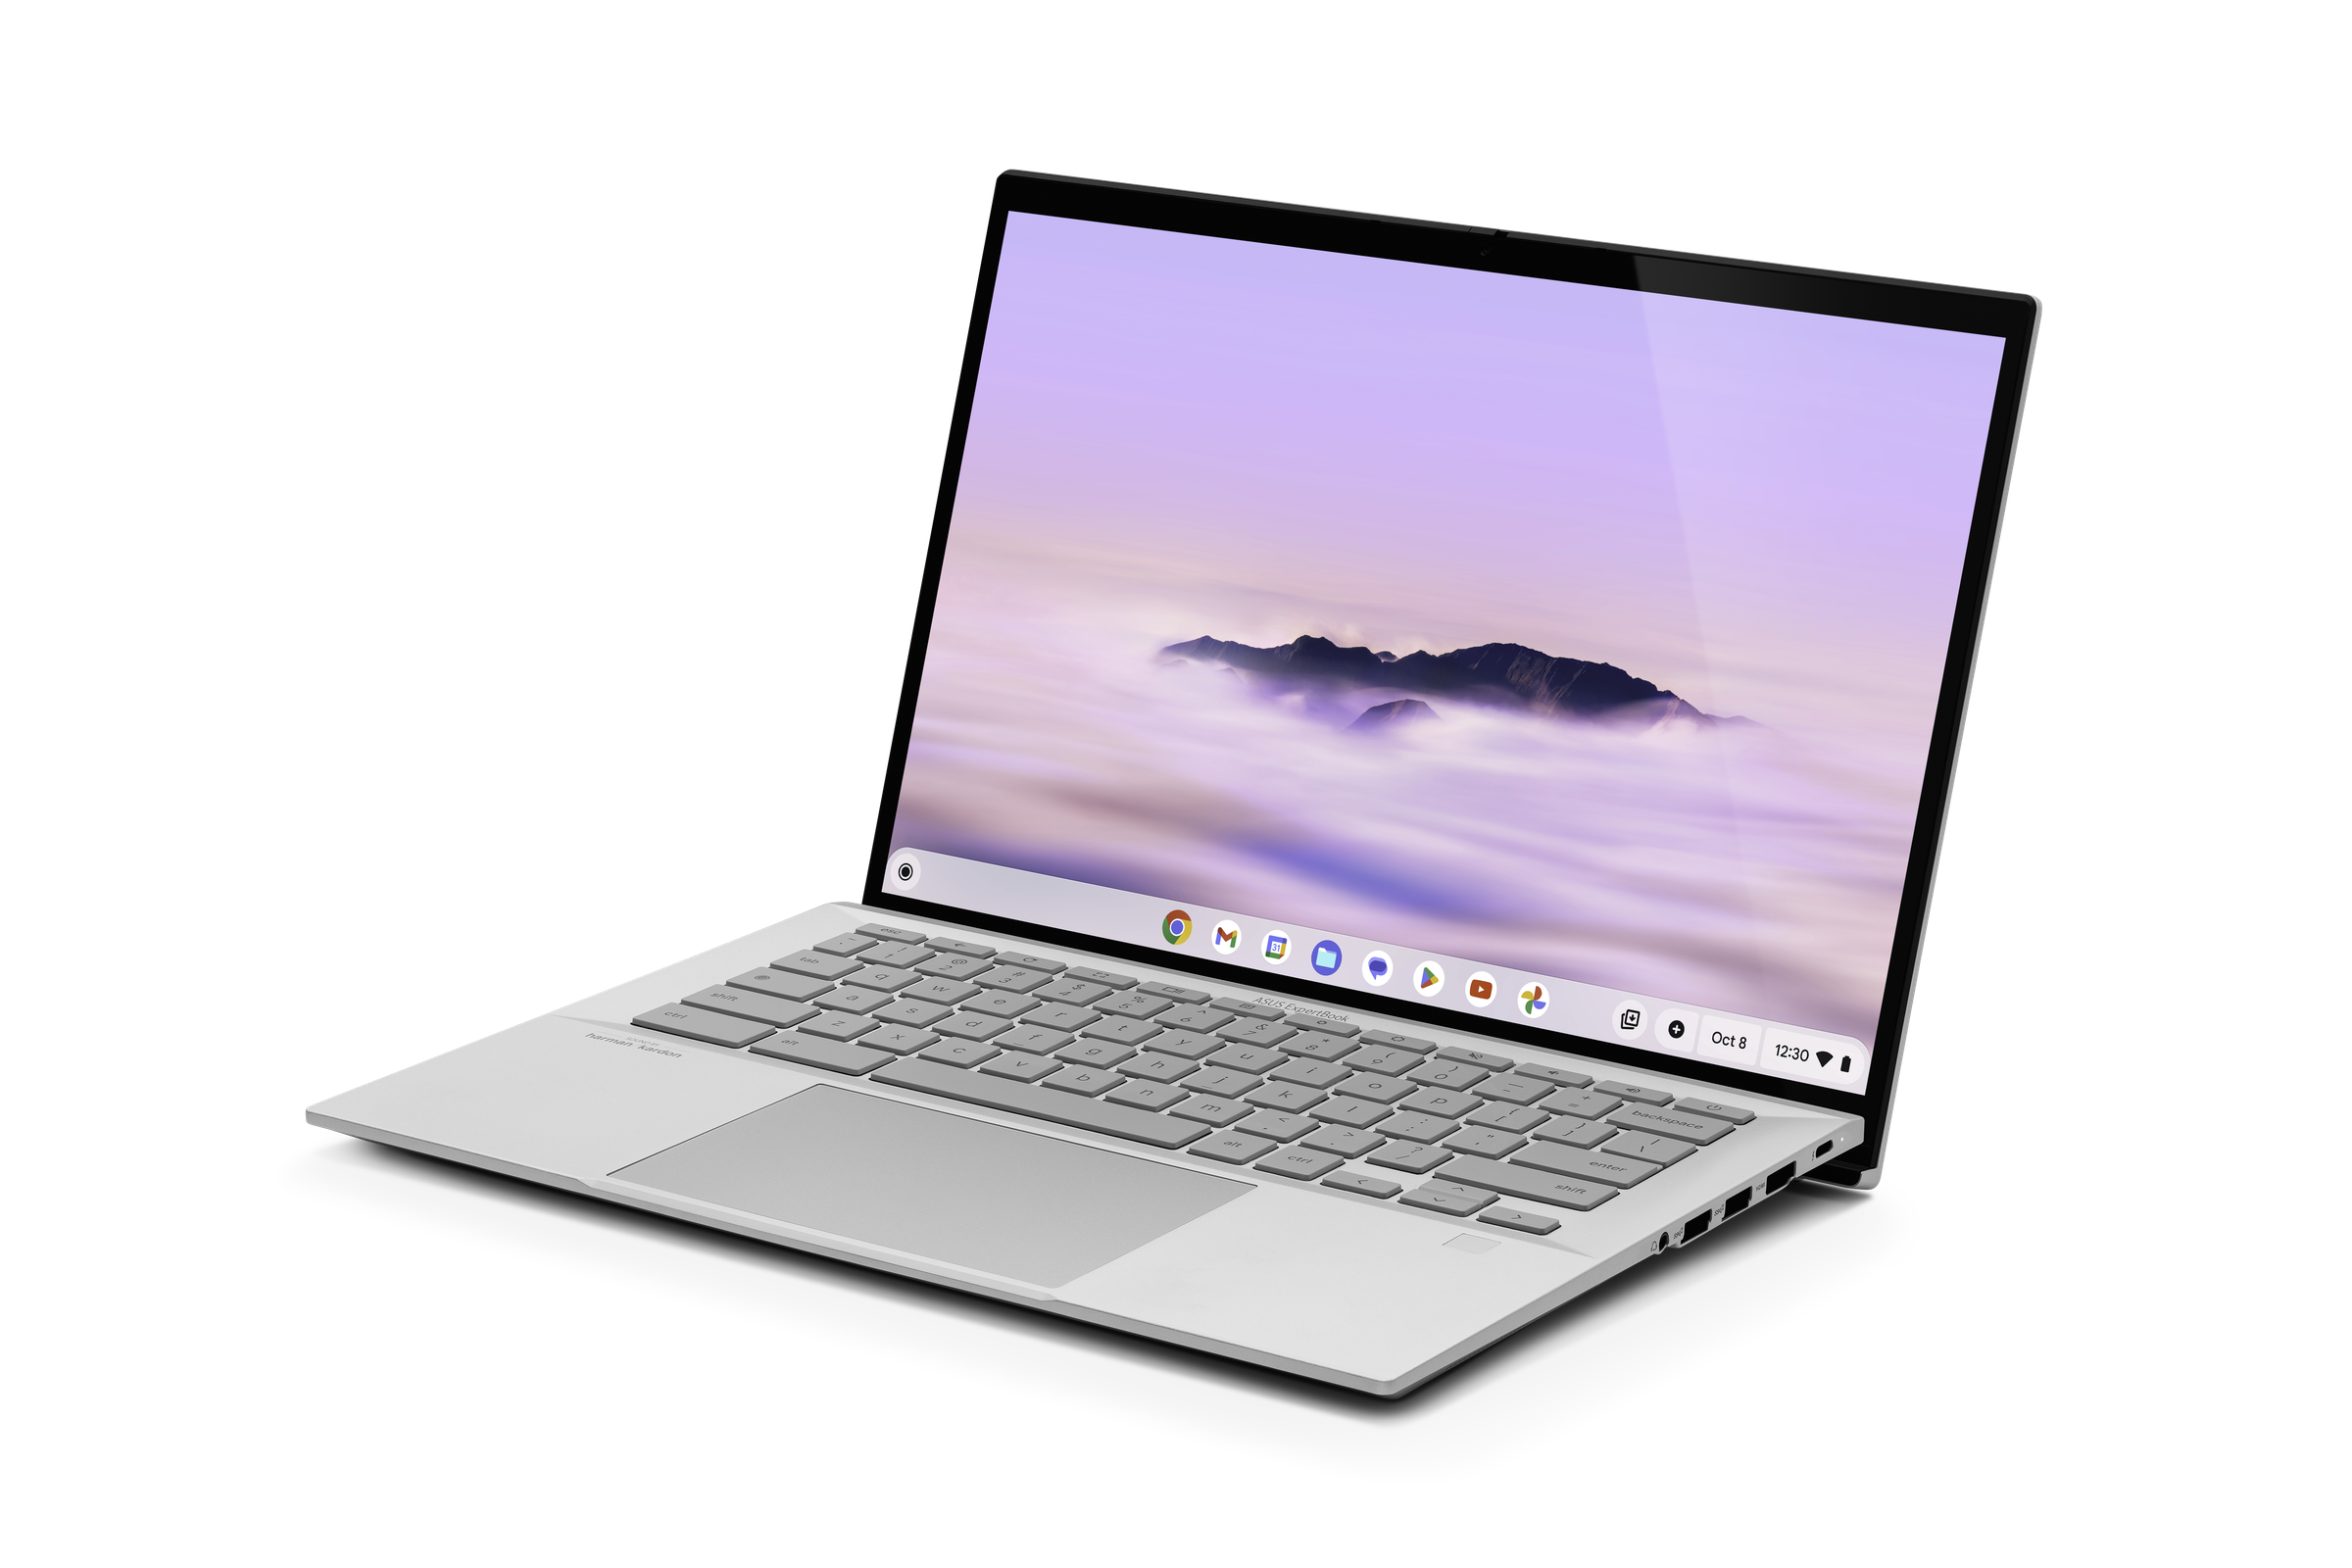 An open and powered-on laptop against a white background.